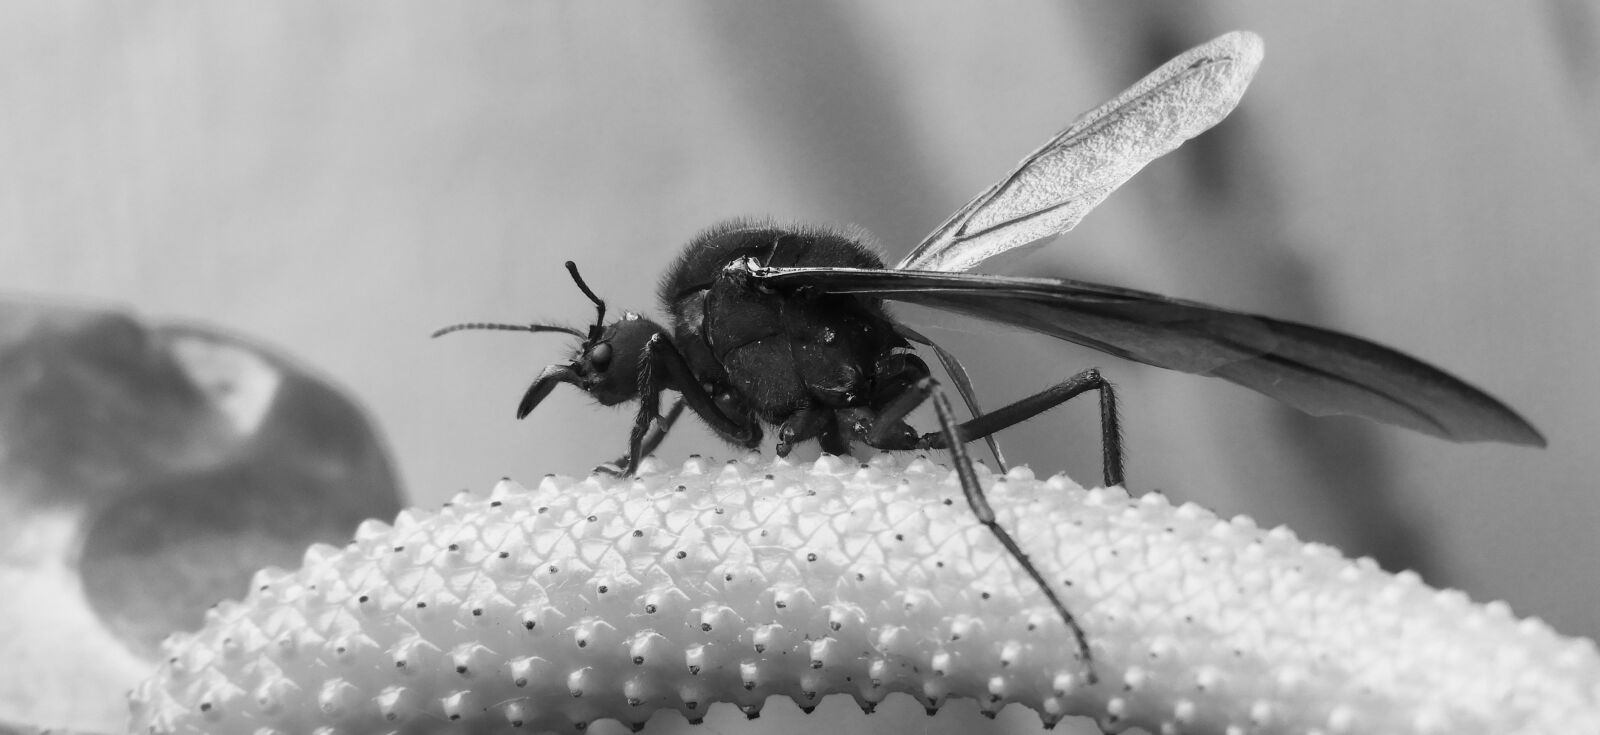 Nikon Coolpix B700 sample photo. Black and white, insect photography